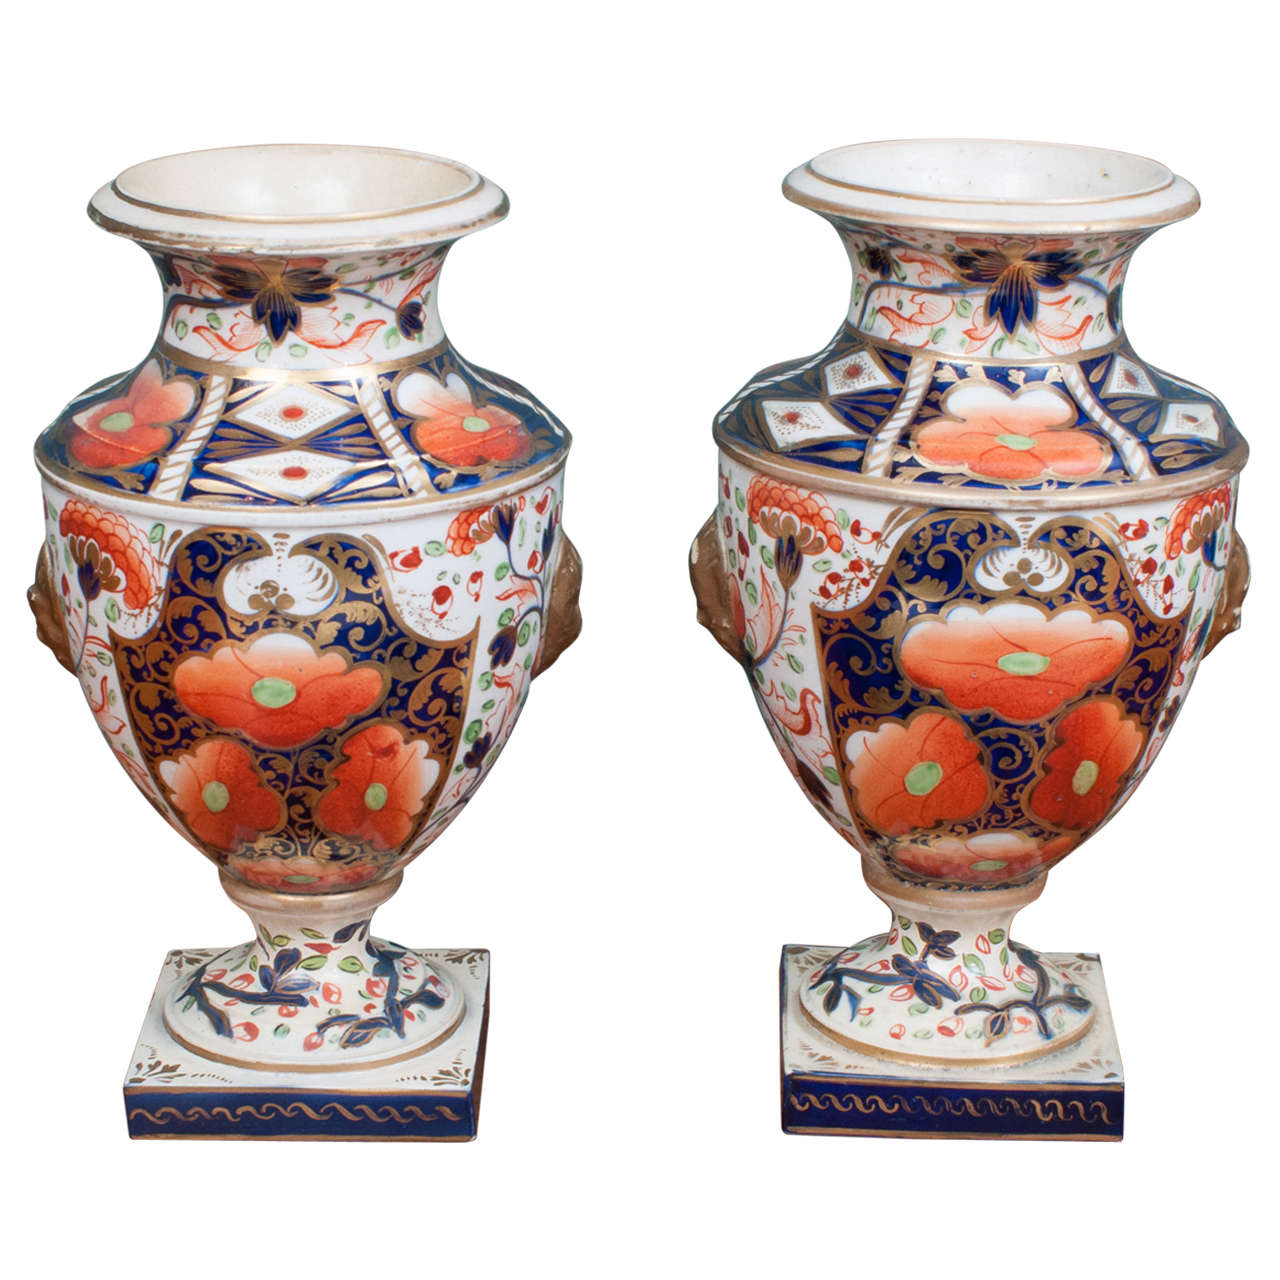 Pair of Derby Porcelain Urns in the "Old Japan" Pattern, England, 1800-1825 For Sale